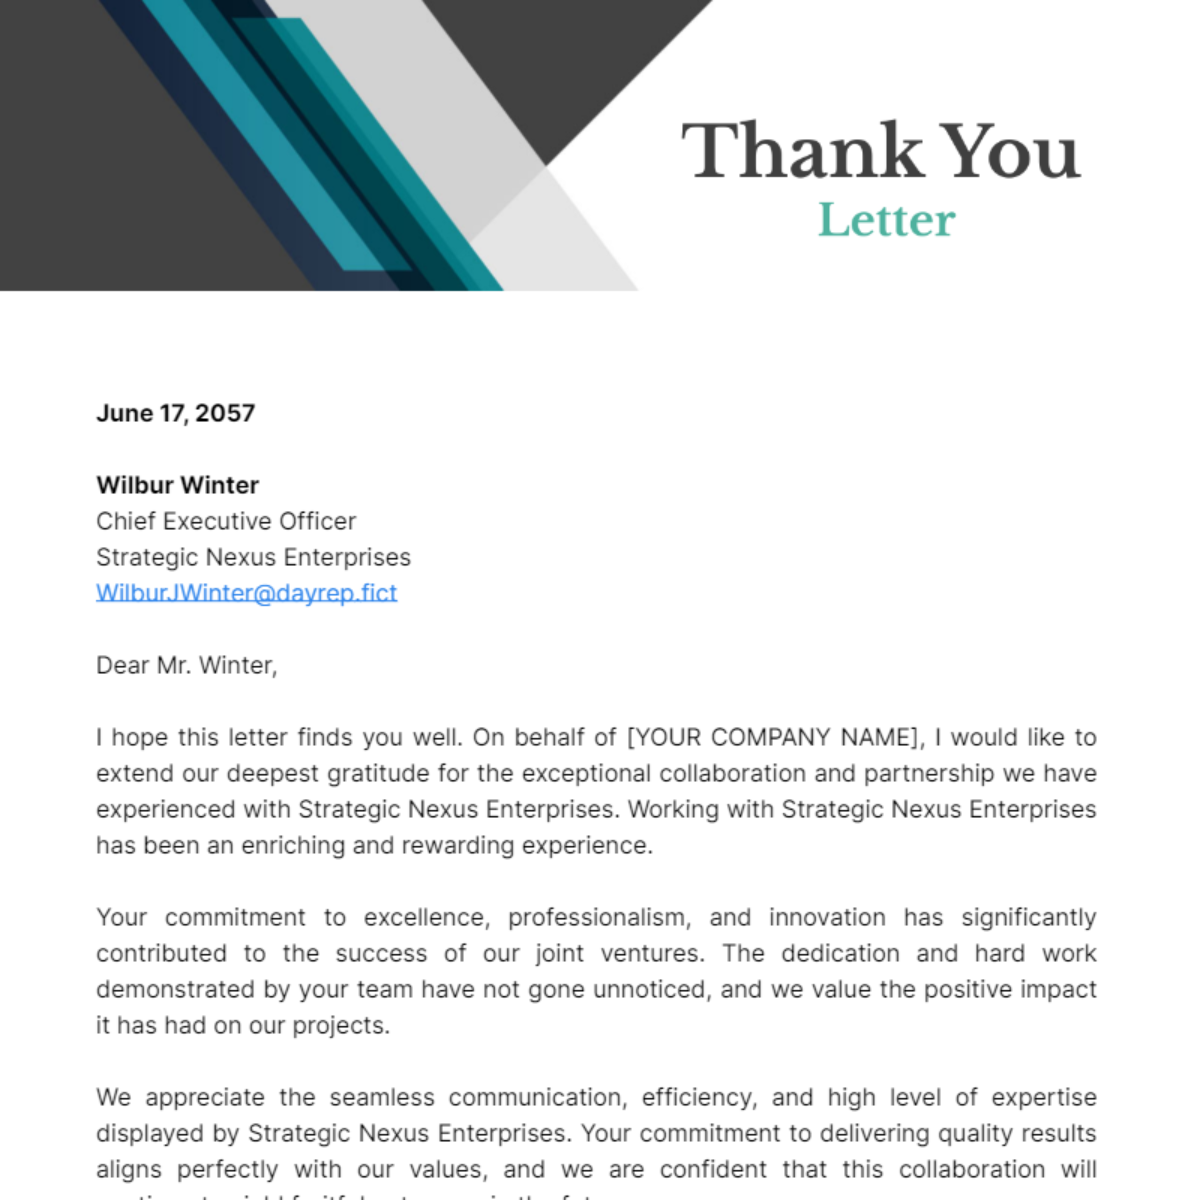 Thank You Letter Template